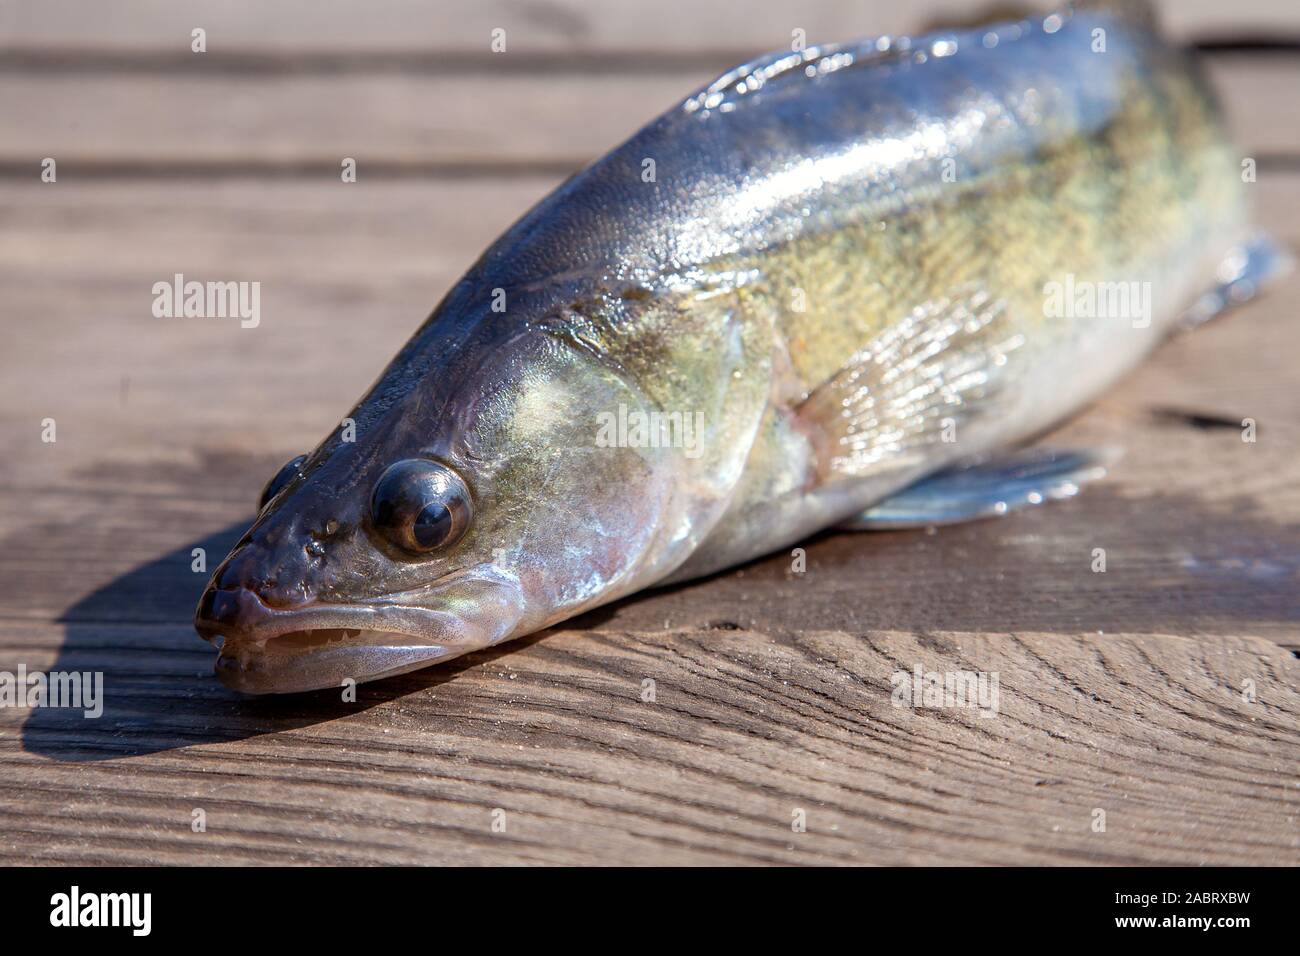 Fishing concept, trophy catch - big freshwater zander fish know as sander lucioperca just taken from the water on vintage wooden background. Stock Photo